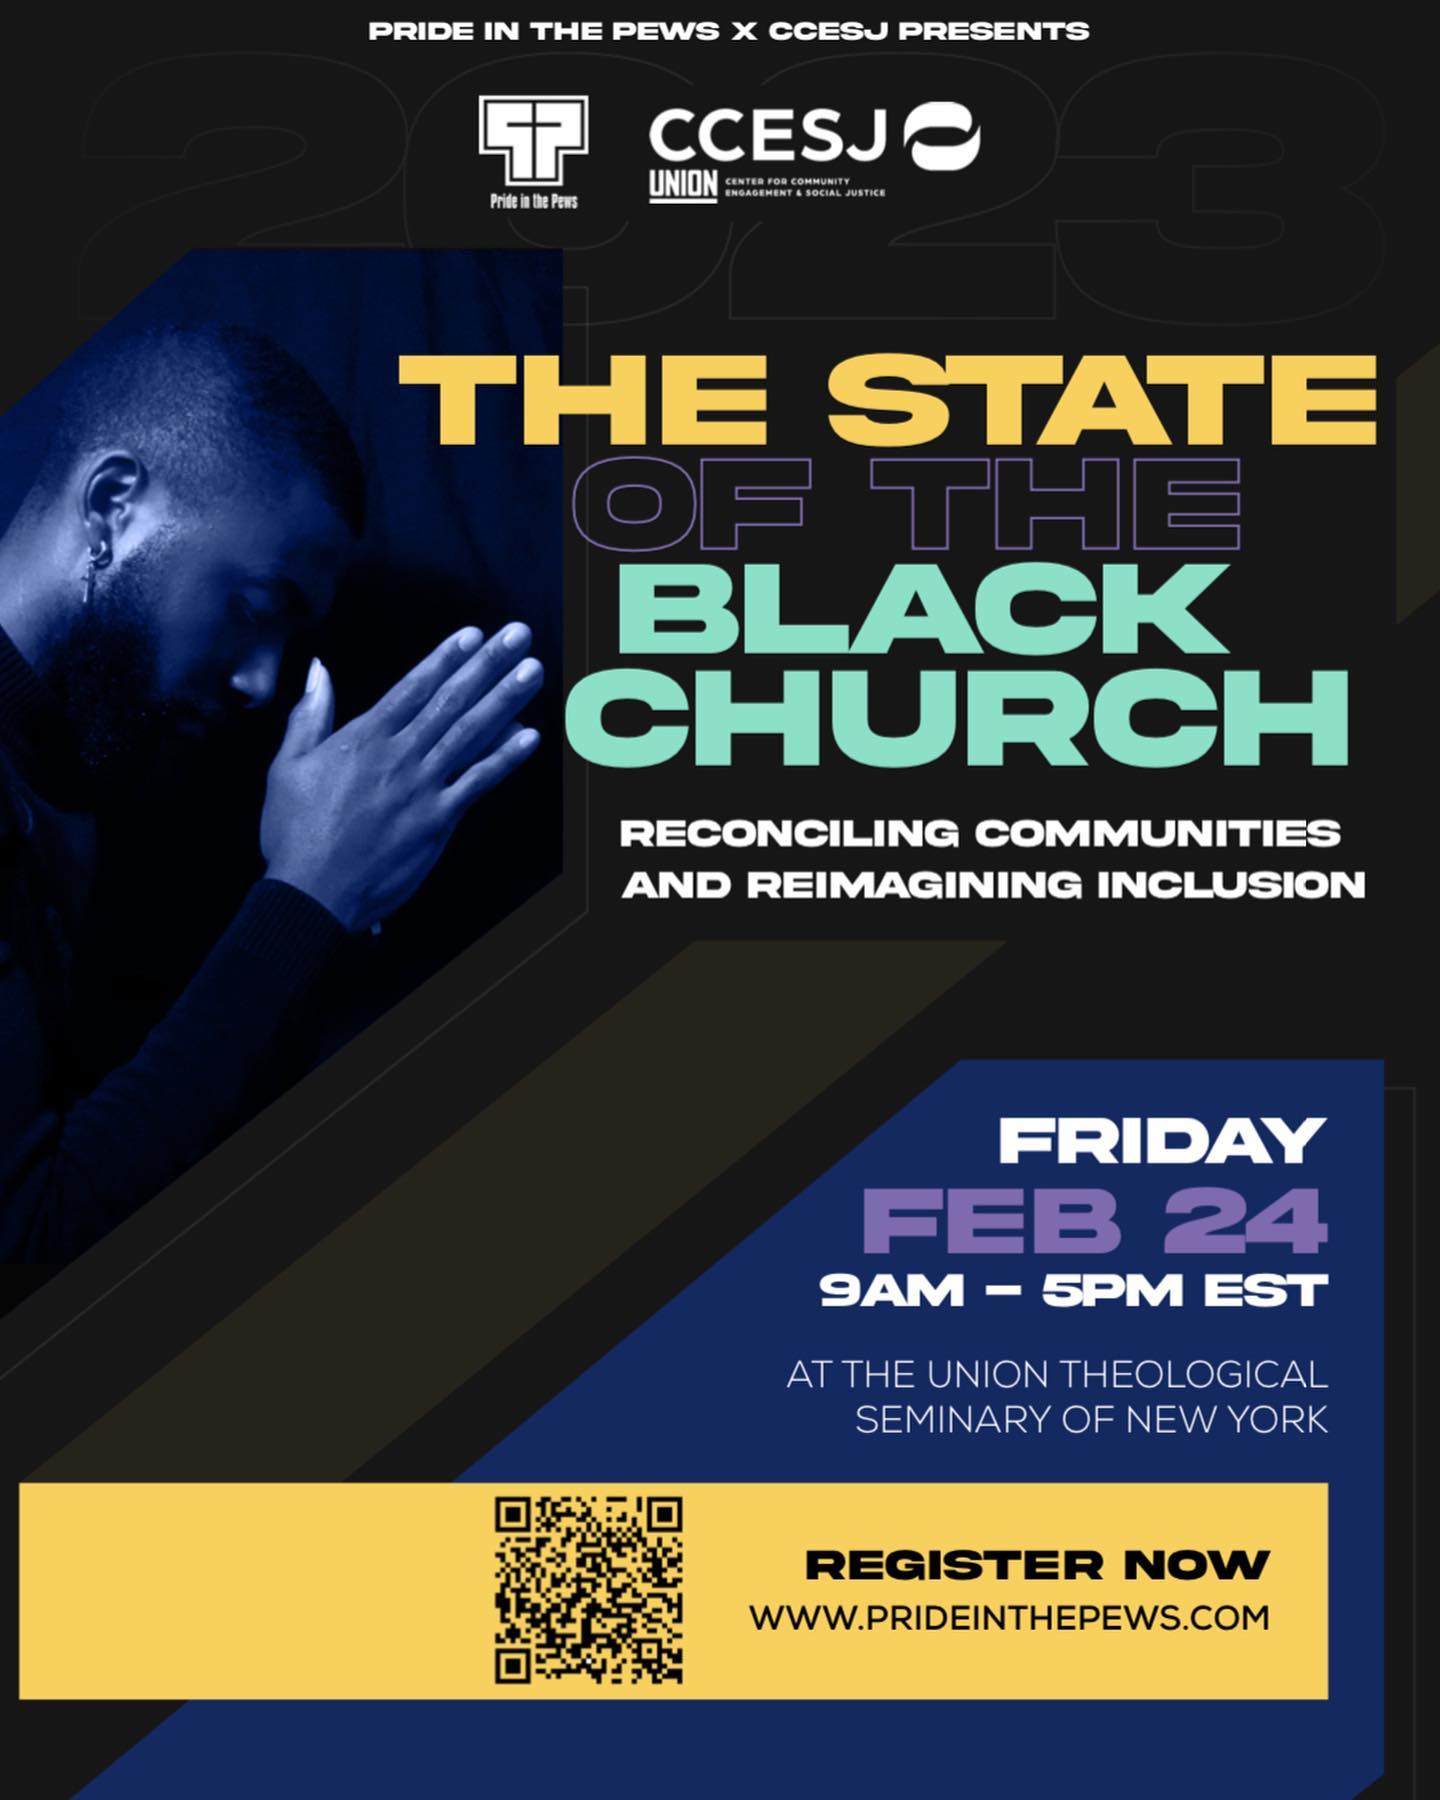 The State of the Black Church: Reconciling Communities and Reimagining Inclusion